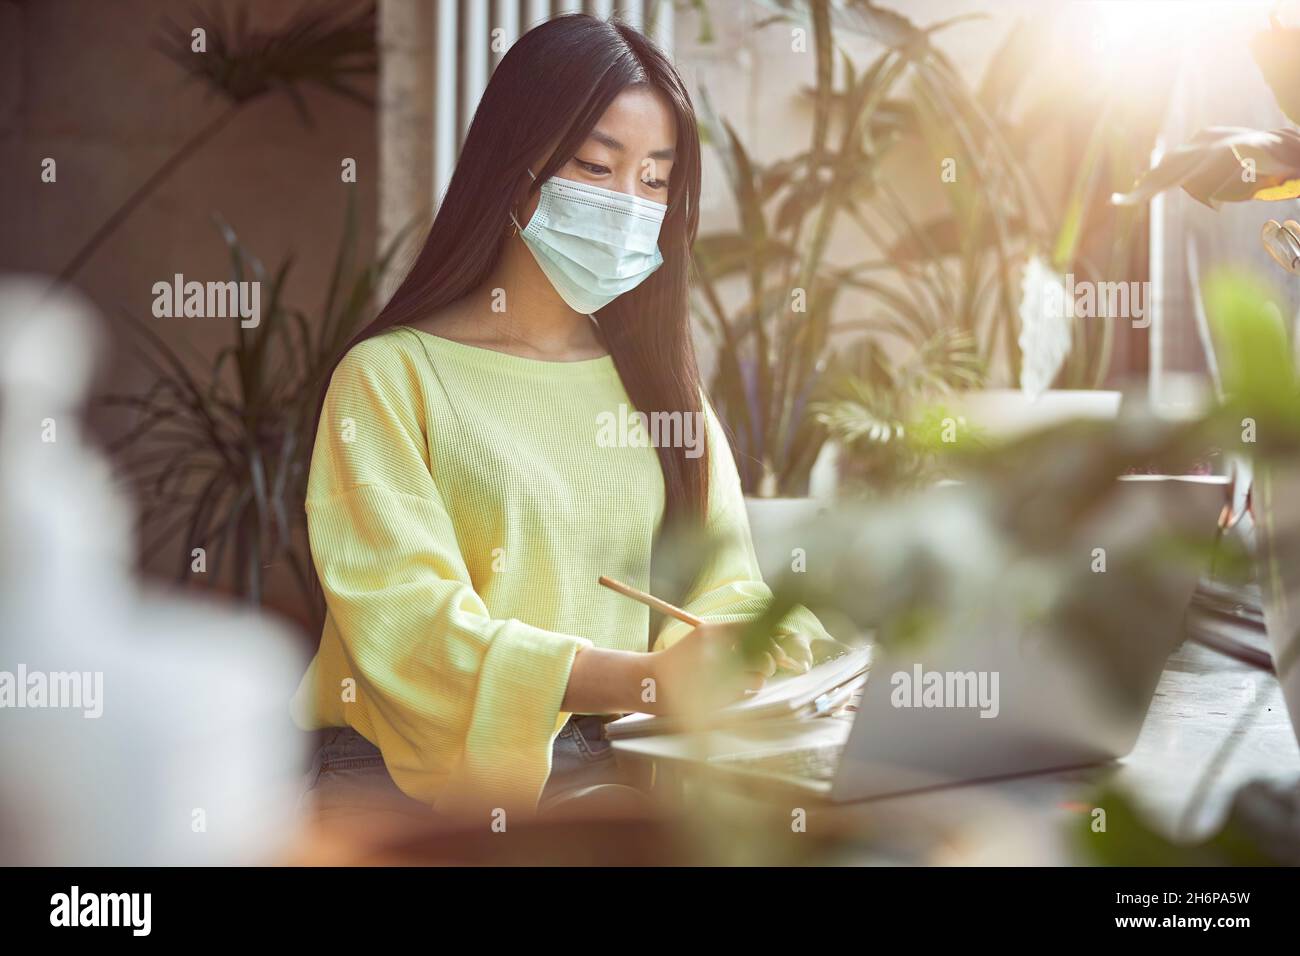 Attractive woman wearing yellow jumper while working in medical mask so as not to get virus at urban coffee shop Stock Photo